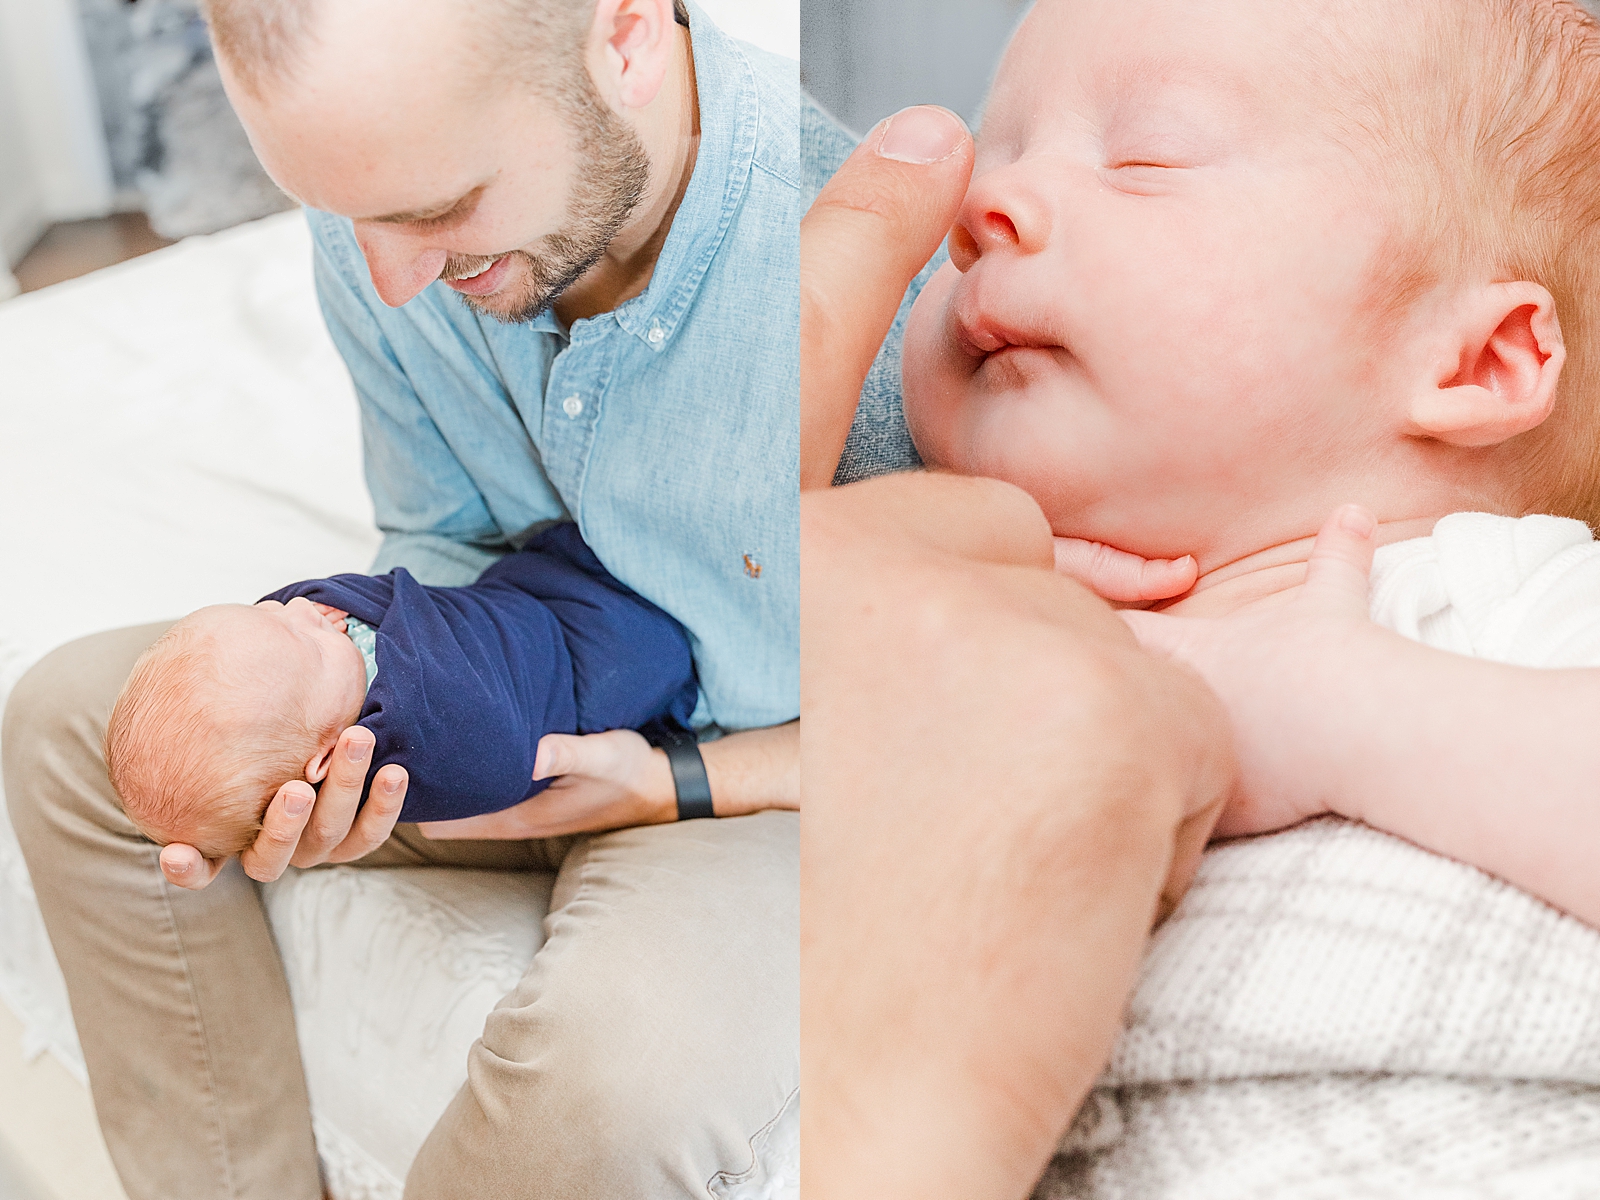 dad looks down at his newborn son he is holding in front of him swaddles and asleep and picture of dad booping his sons nose during lifestyle newborn photos in their home